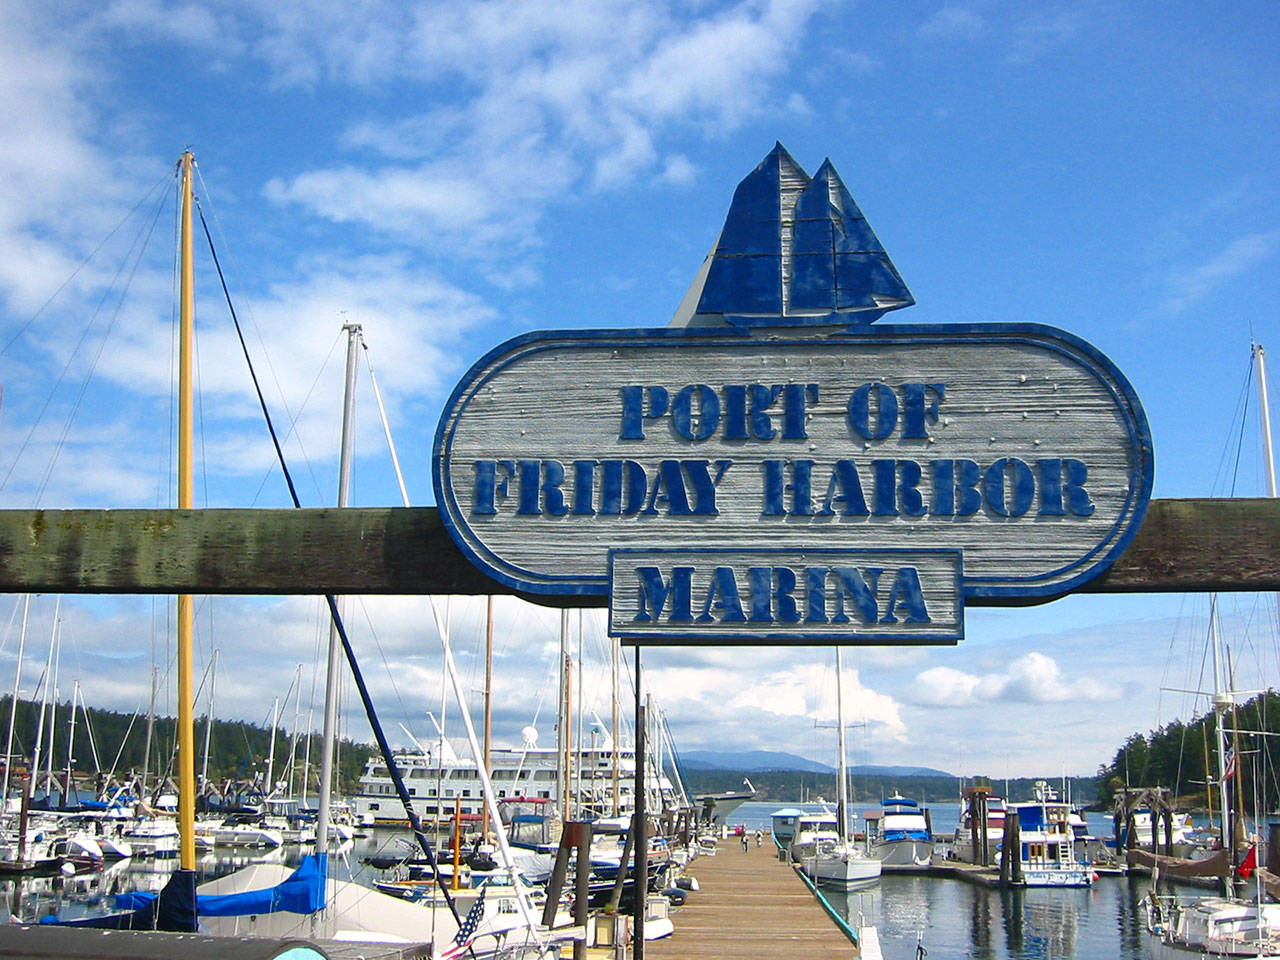 Special Port of Friday Harbor meeting on May 10